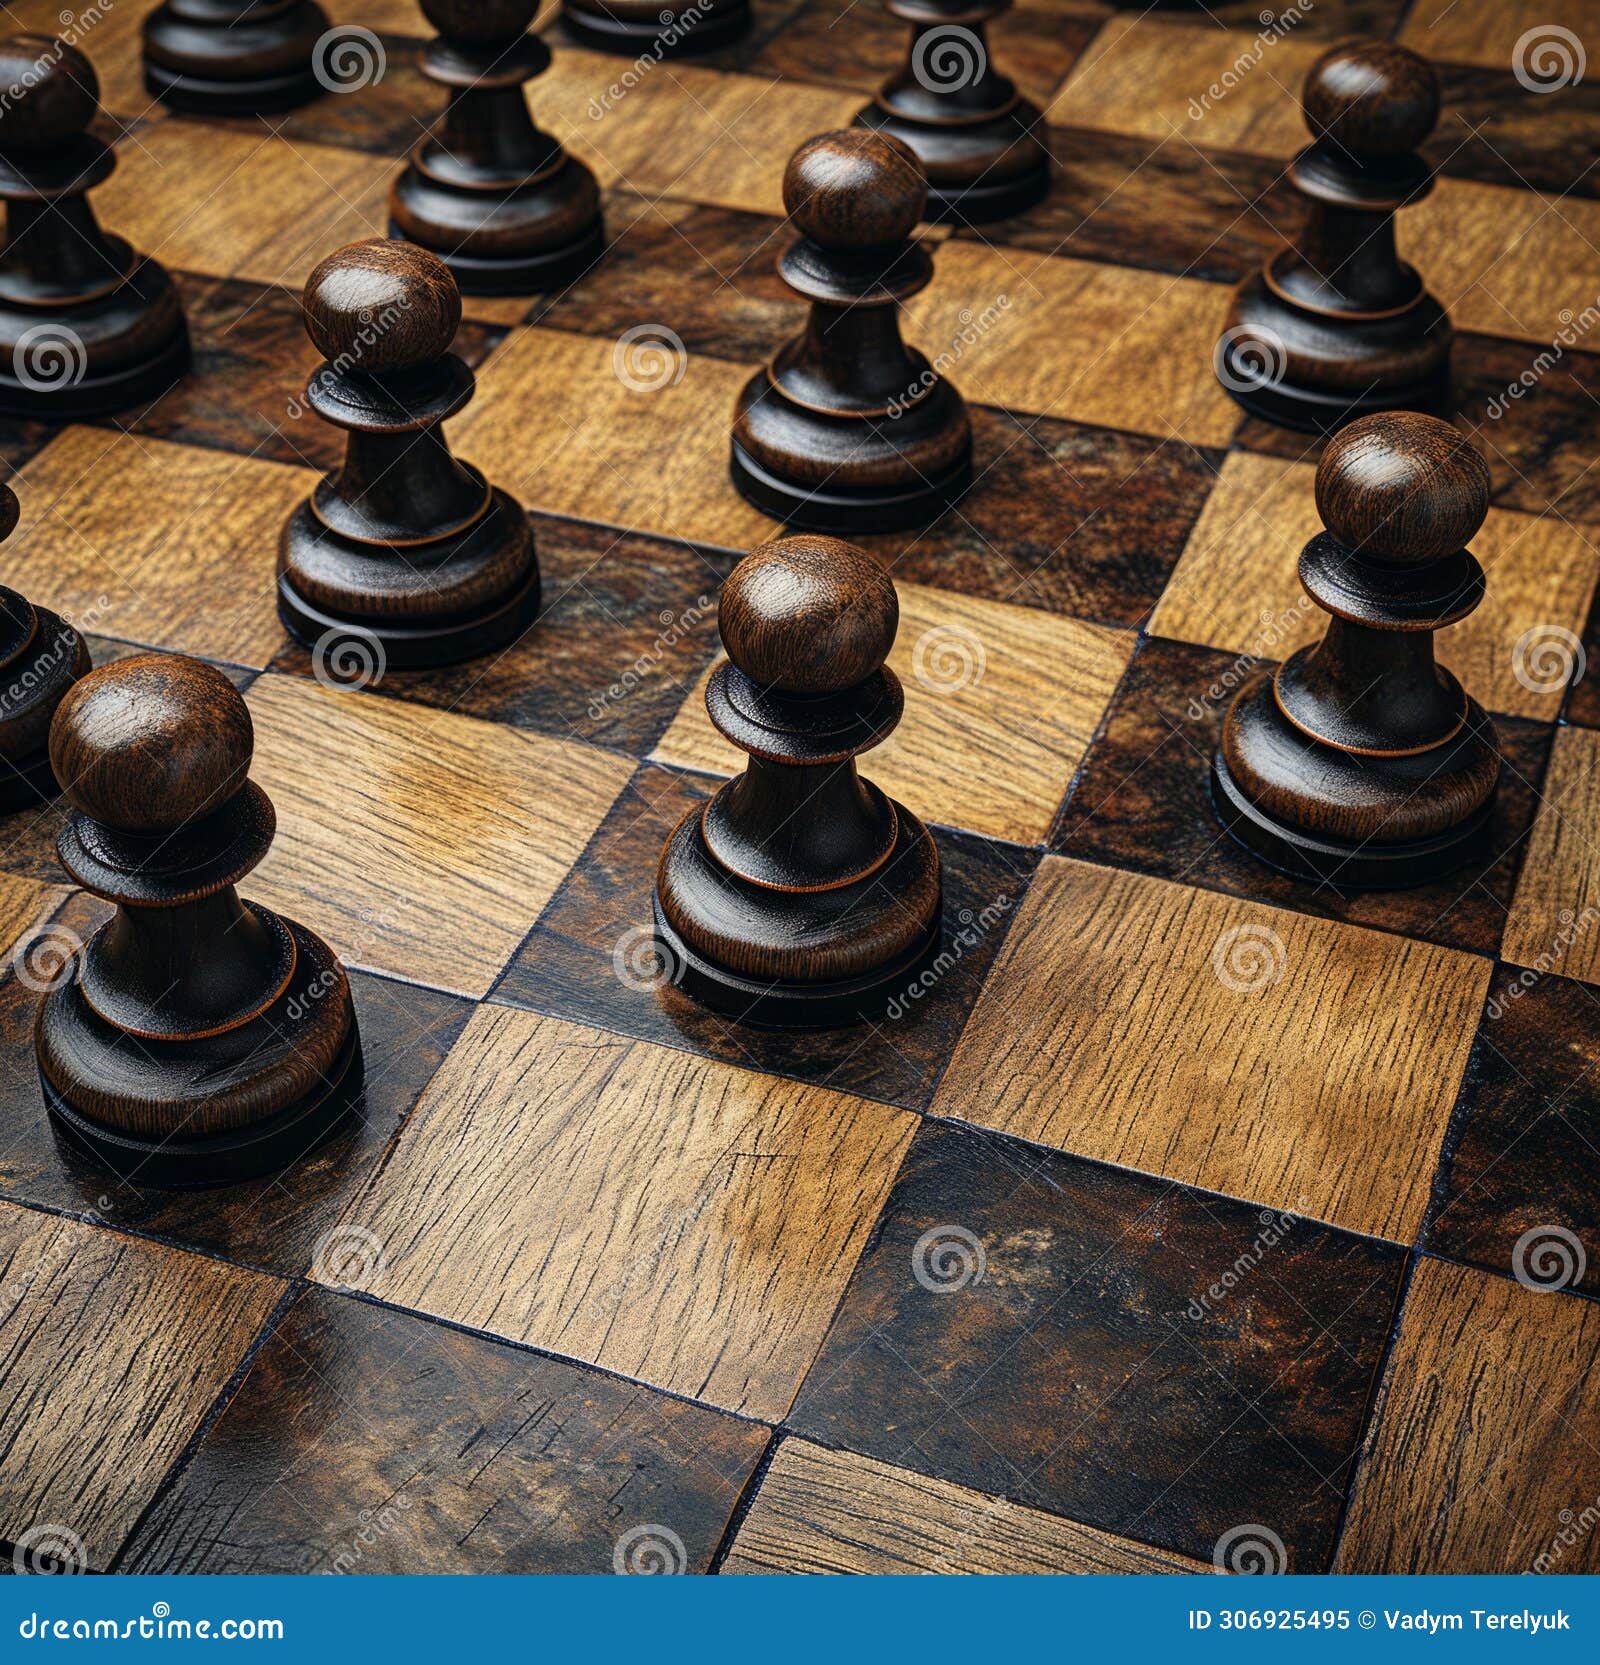 close up of chess board with pieces, strategy game challenge for thinkers